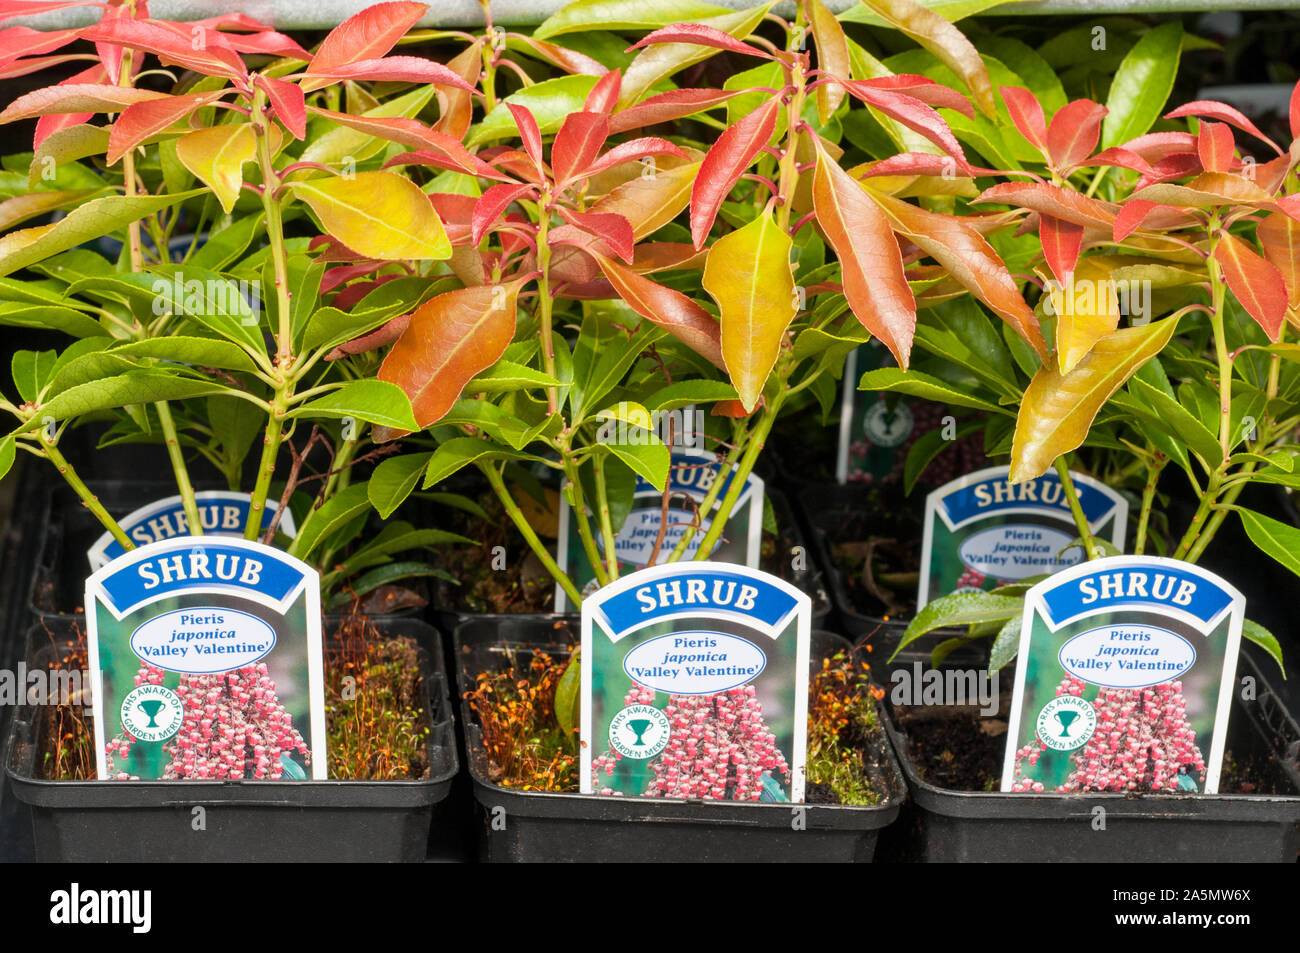 Young Pieris Valley Valentine plants in 9cm pots ready for planting on Has clusters of small pink and white flowers in spring is an evergreen shrub Stock Photo